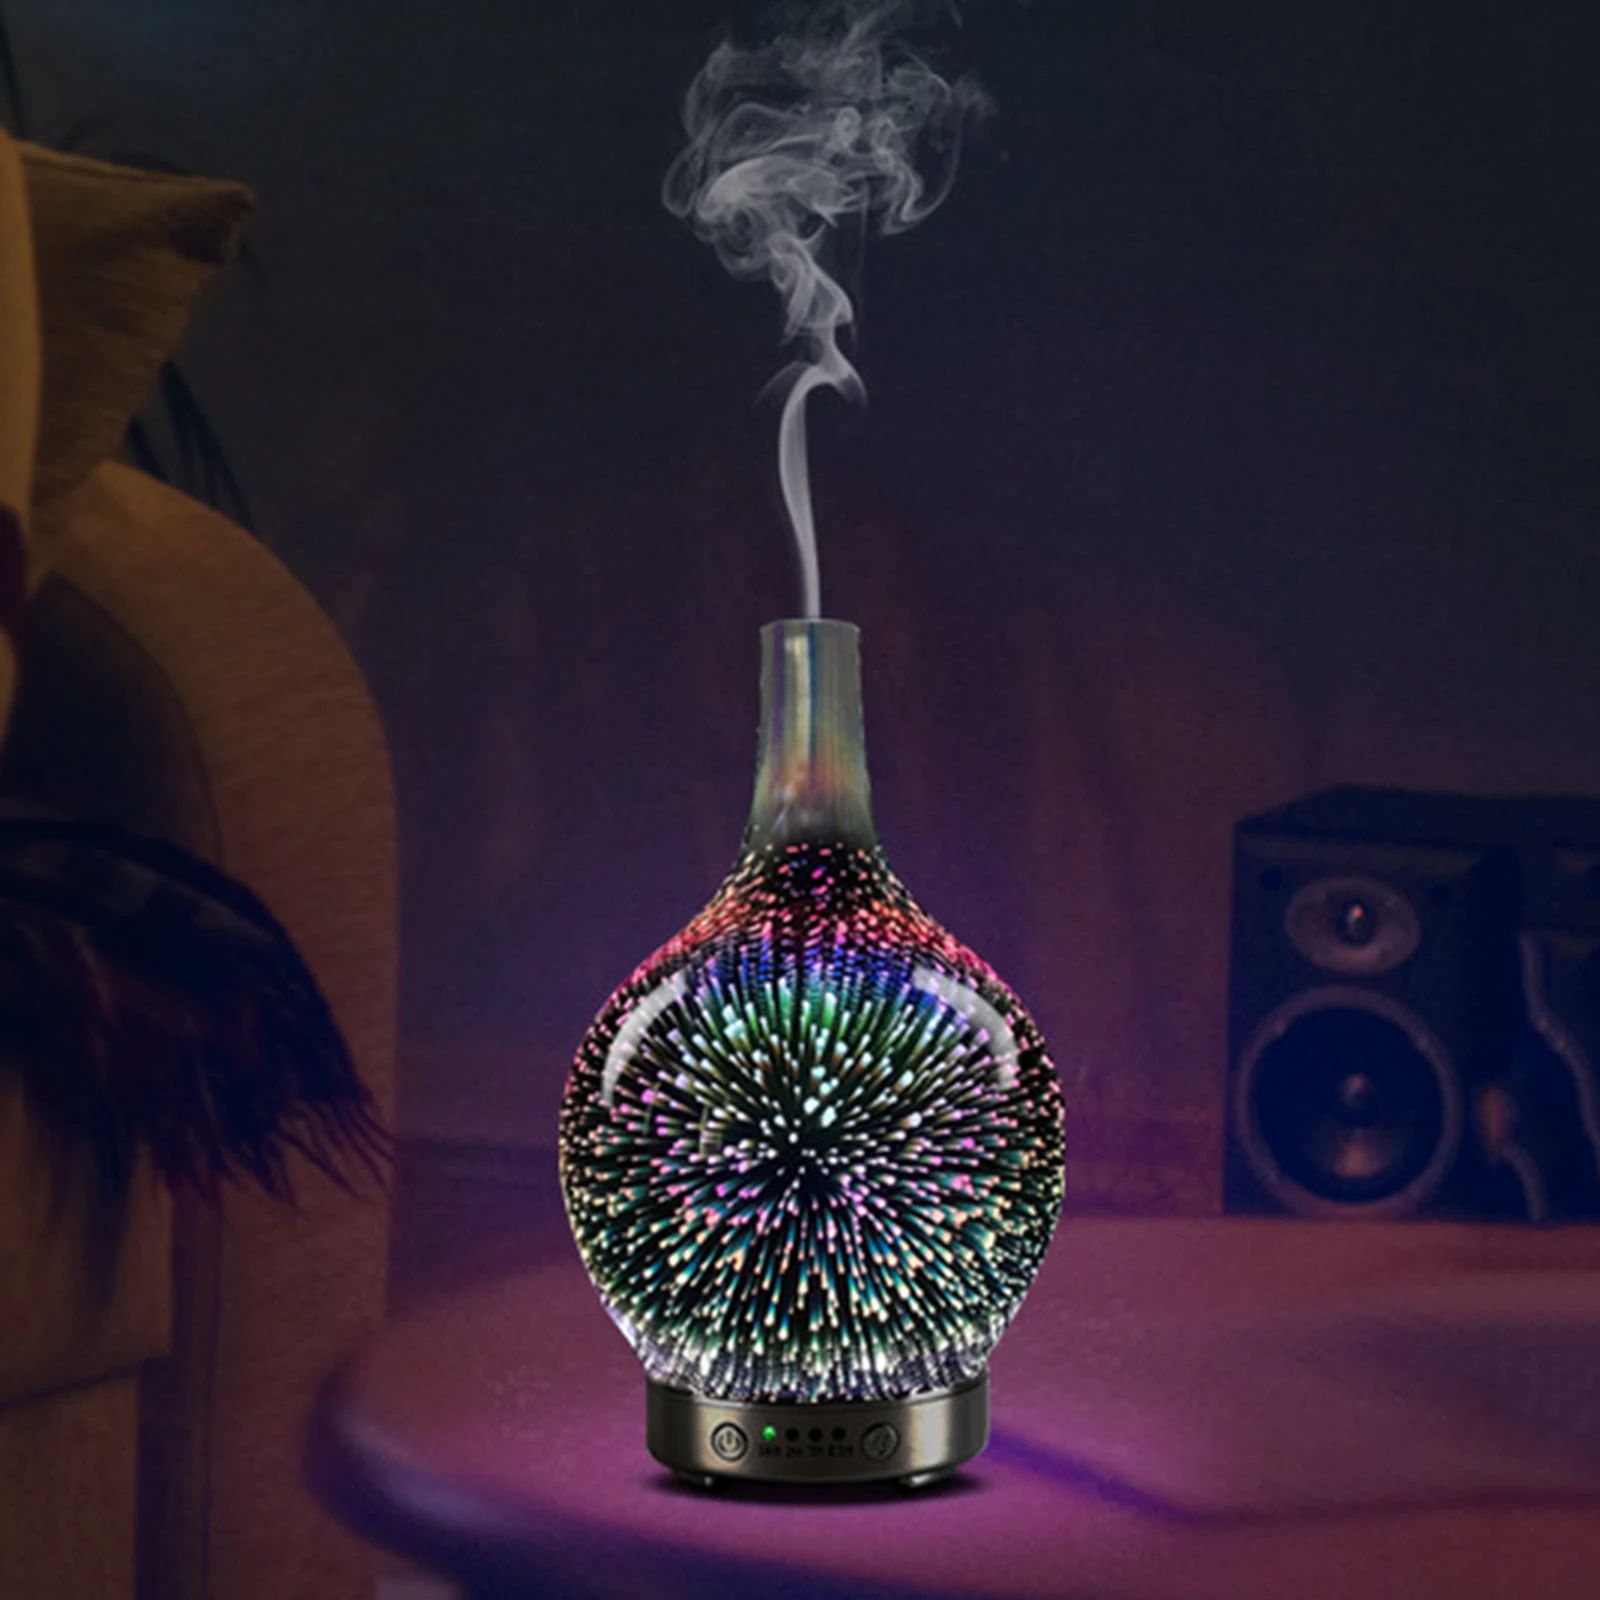 3D Essential Oil Diffuser Quiet Aromatherapy Humidifier Cool Mist with 7 Color Changing Night Light Auto Shut-Off Yoga Leisure